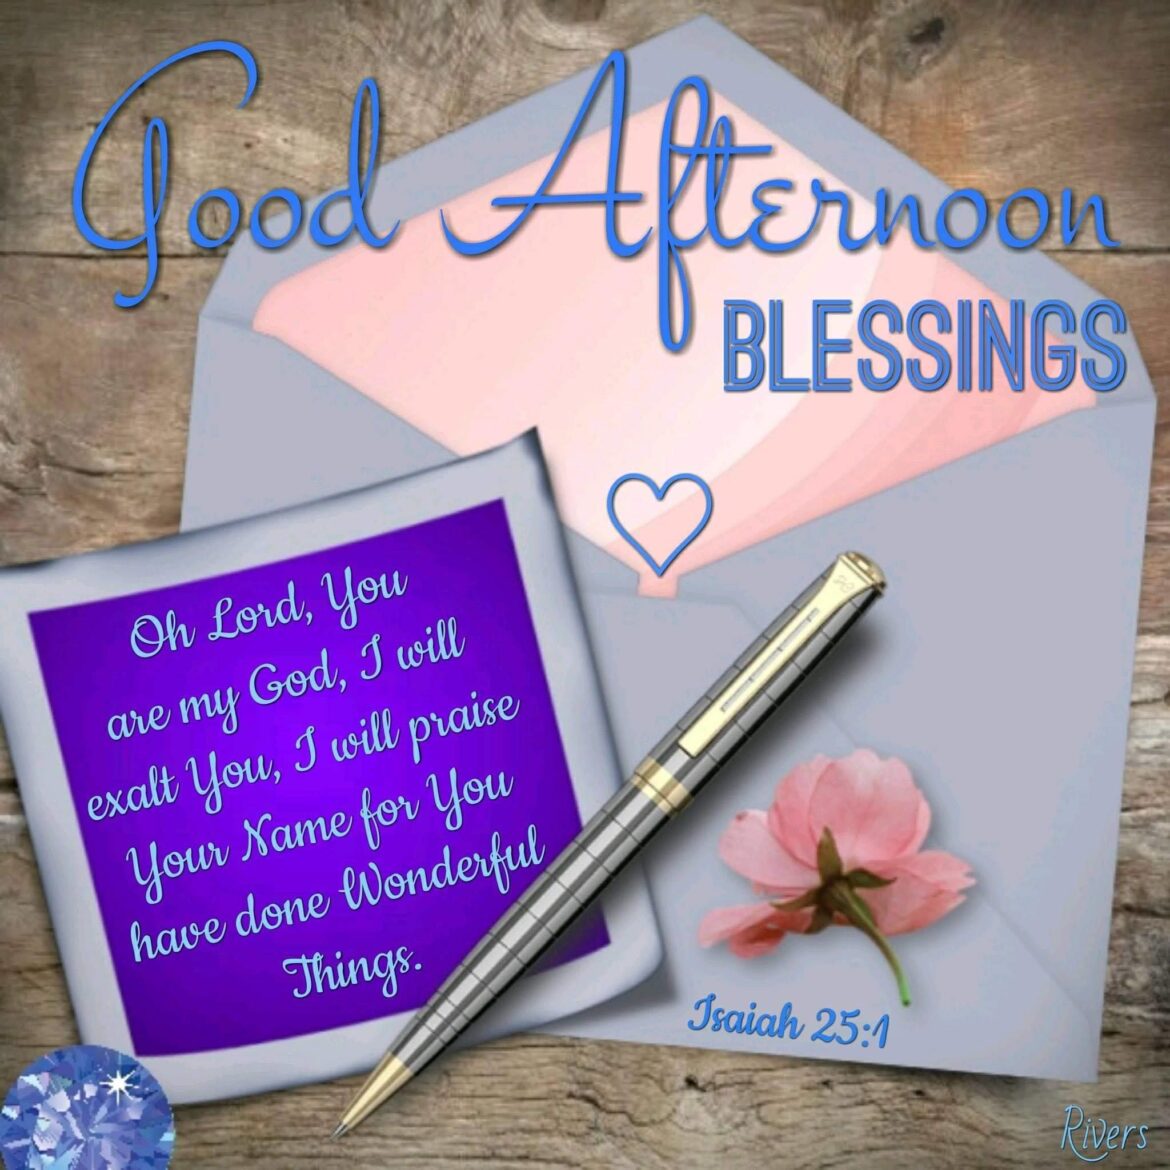 50+ Good Afternoon Blessings For Days Of The Week